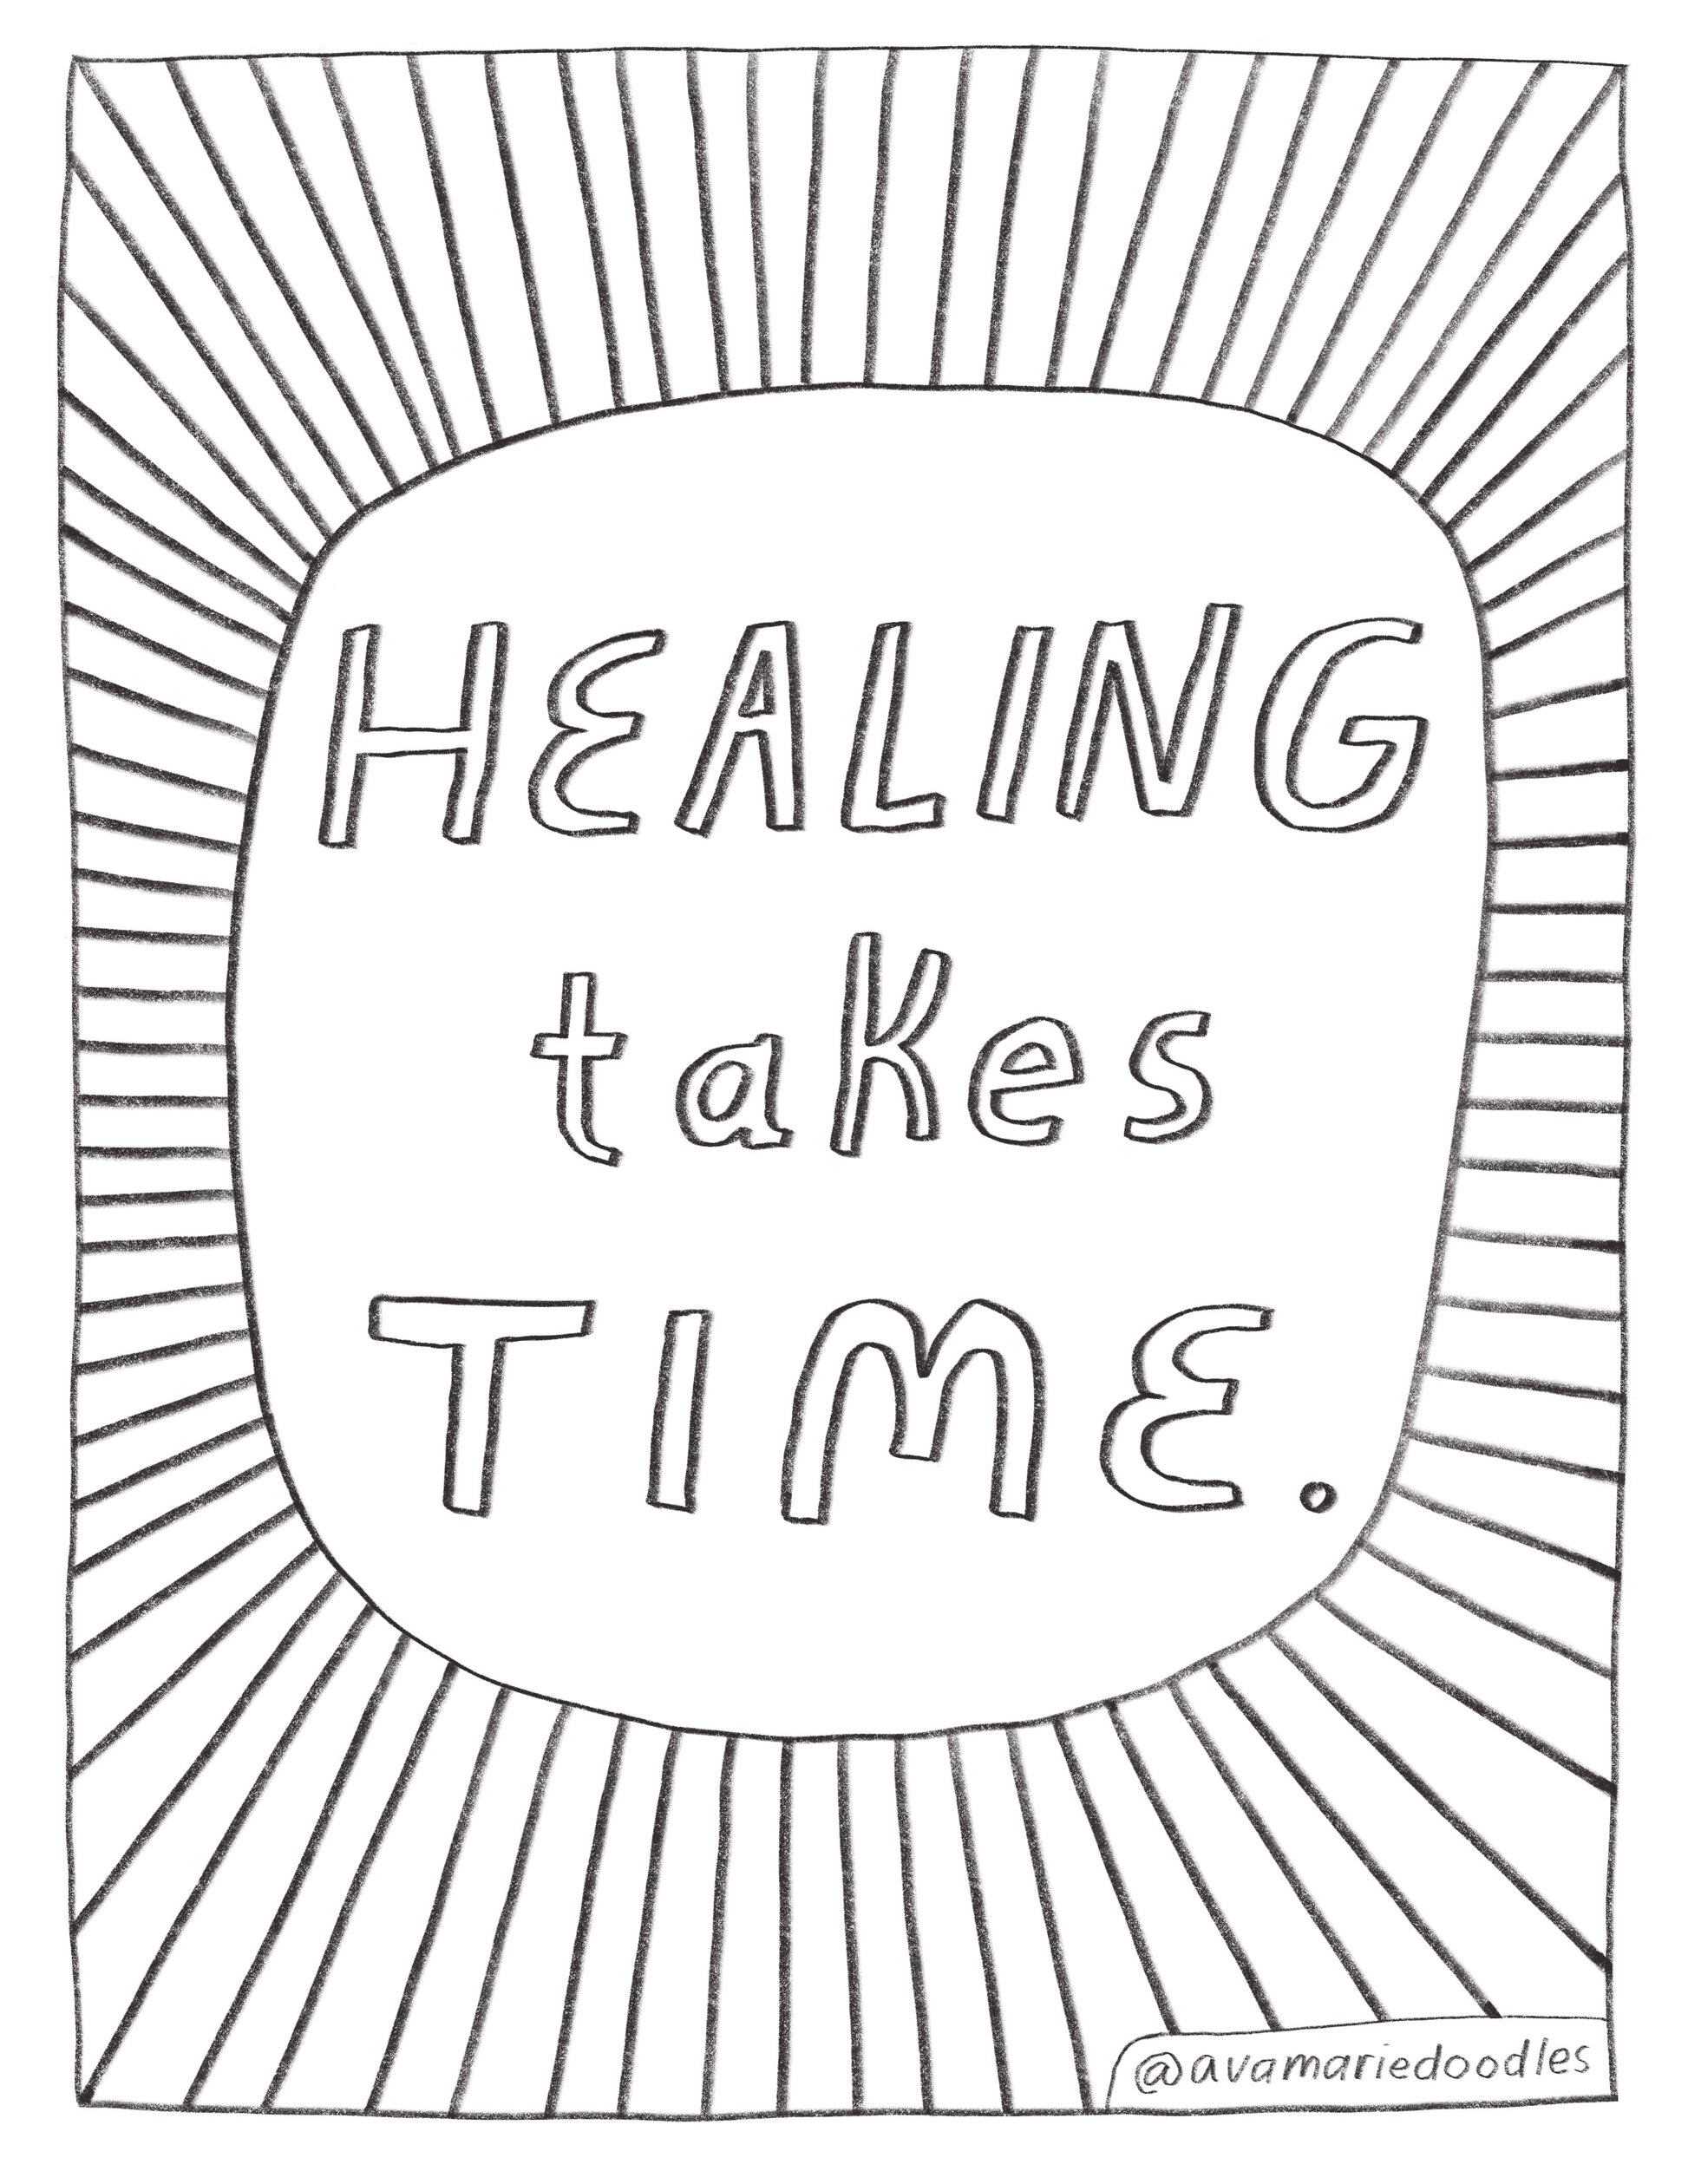 Mindful colouring activity to help with grief